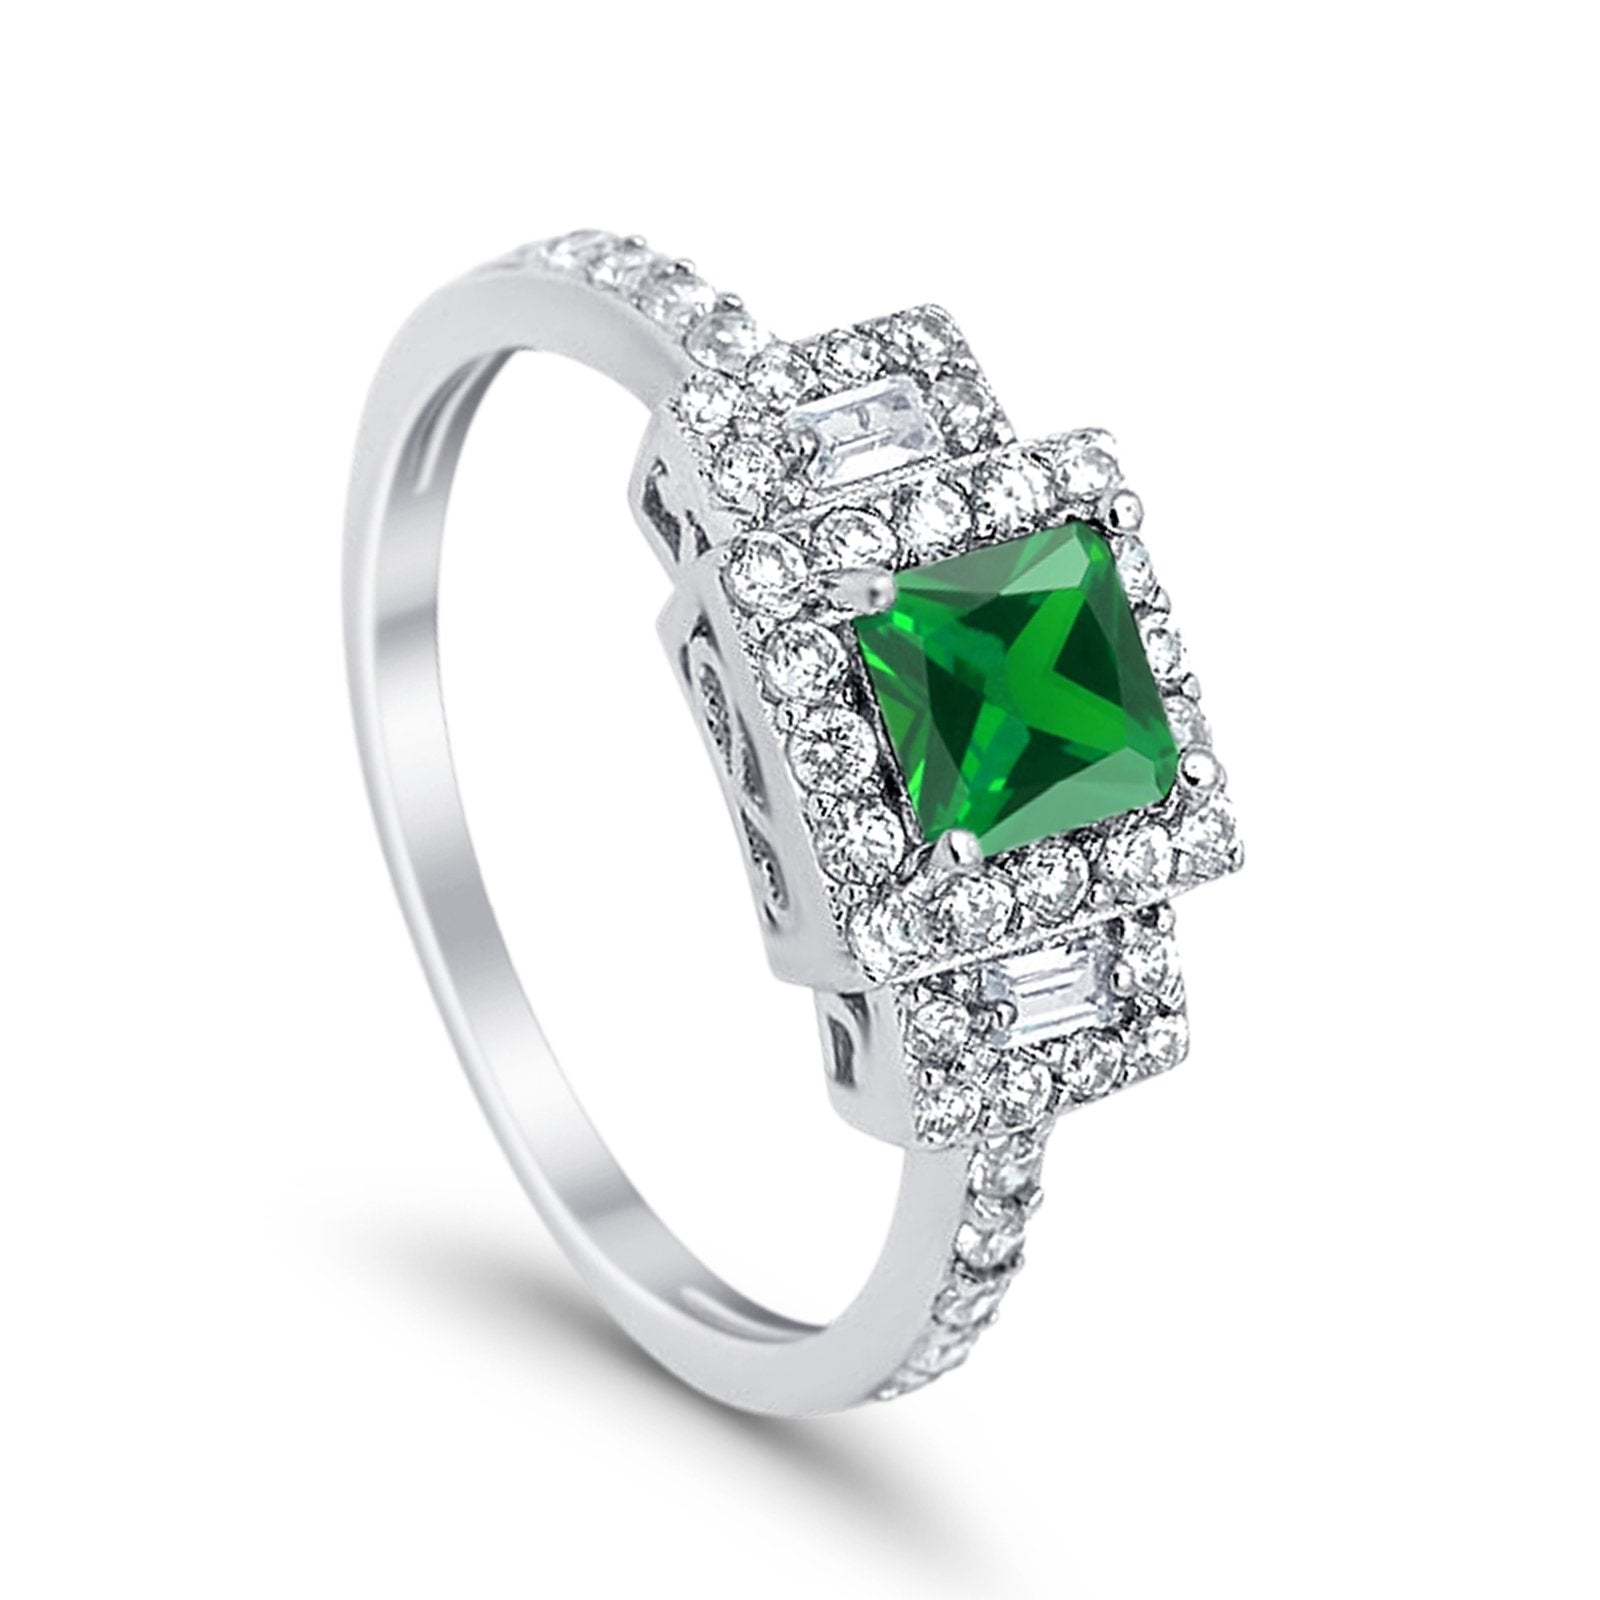 Halo Wedding Ring Baguette Simulated Green Emerald CZ 925 Sterling Silver